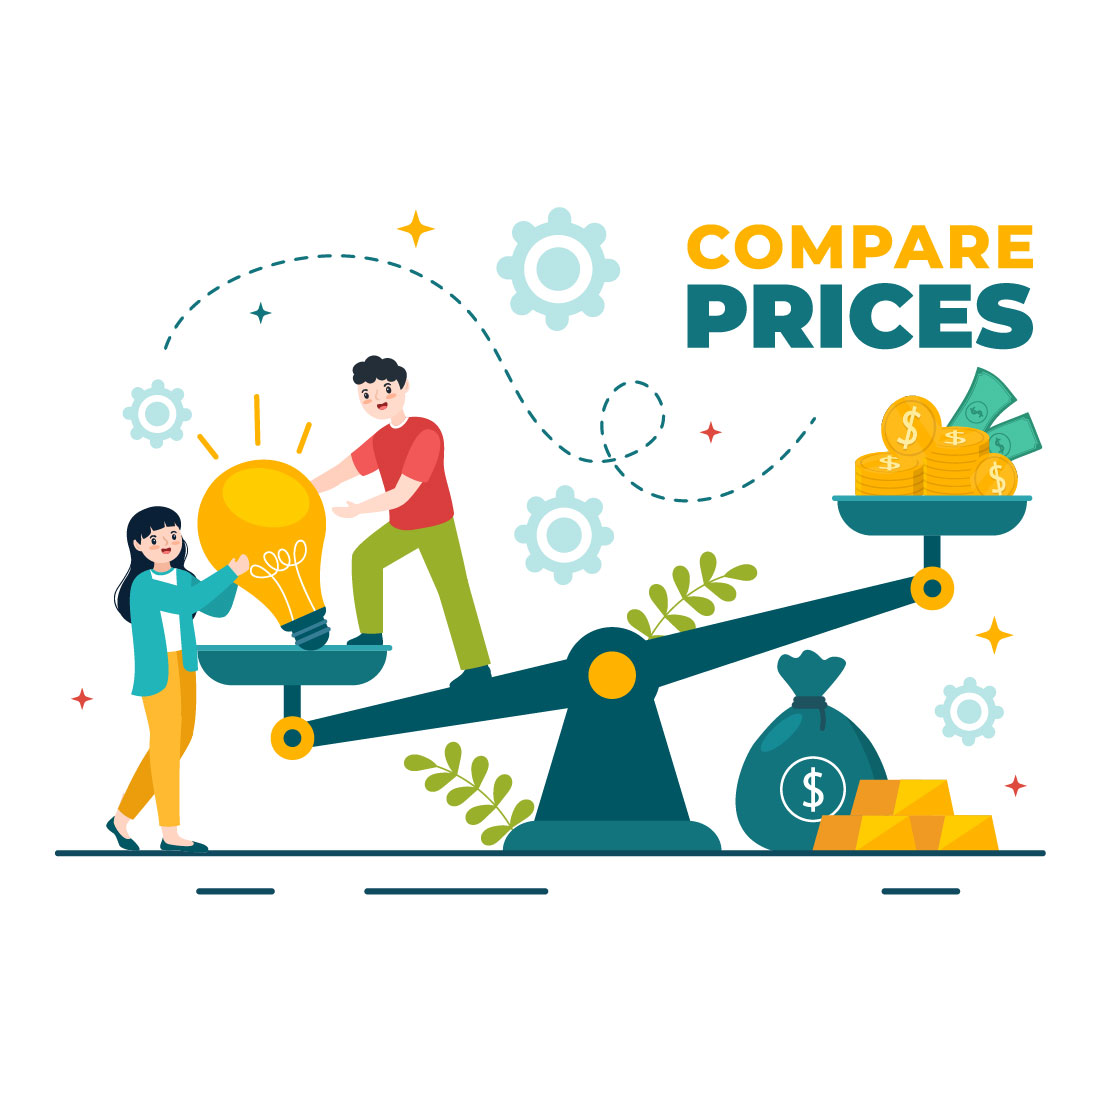 10 Compare Prices Economy Illustration preview image.